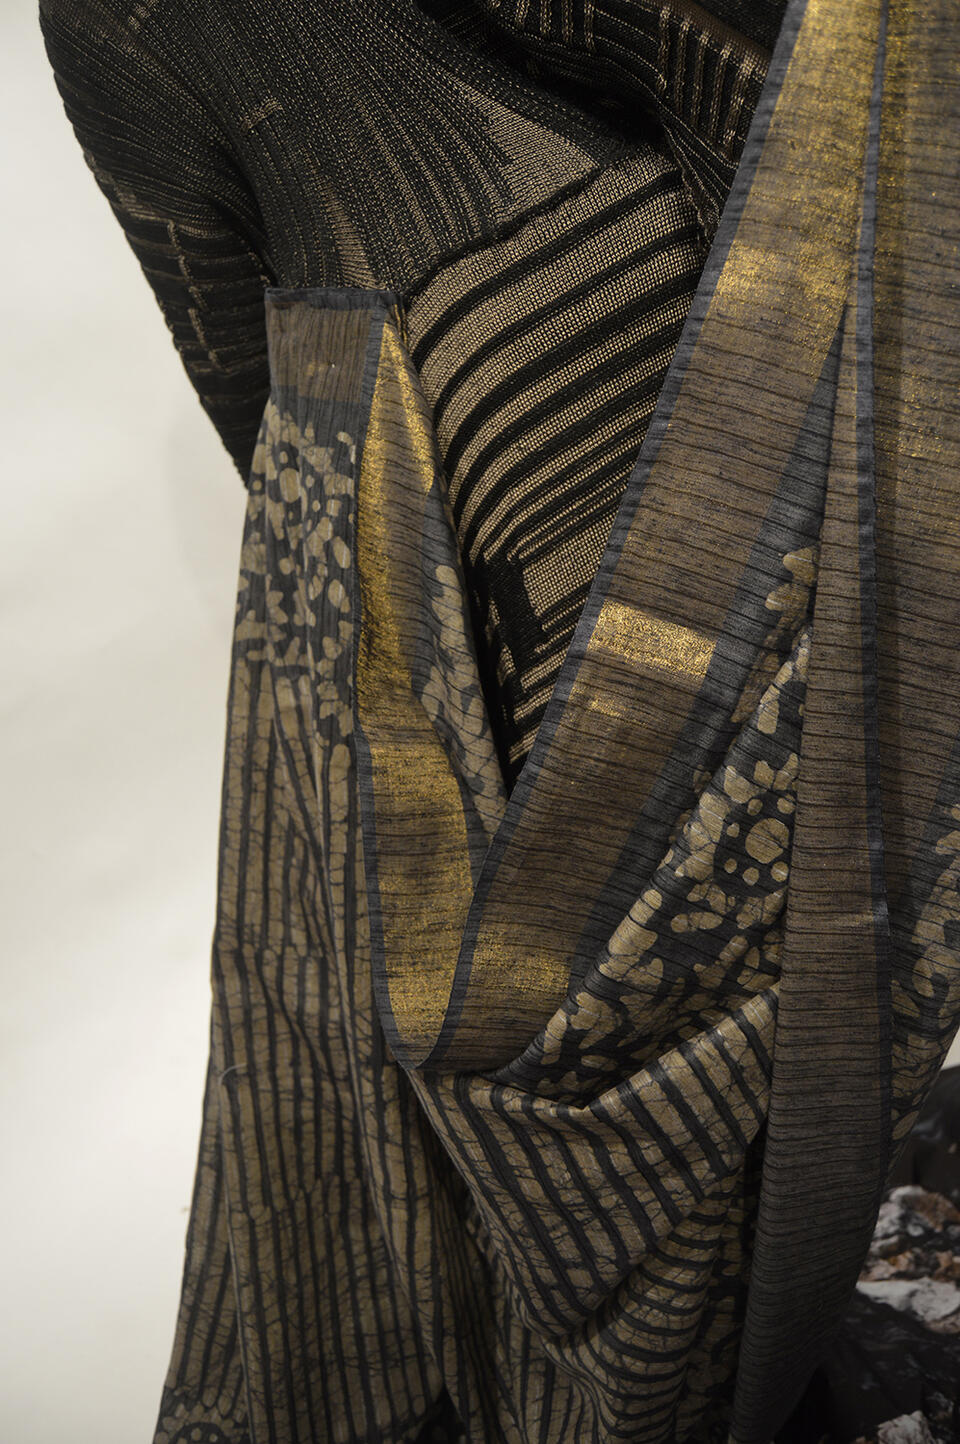 The details of the pleated sari communicate with the rib structure of the knit fabric.